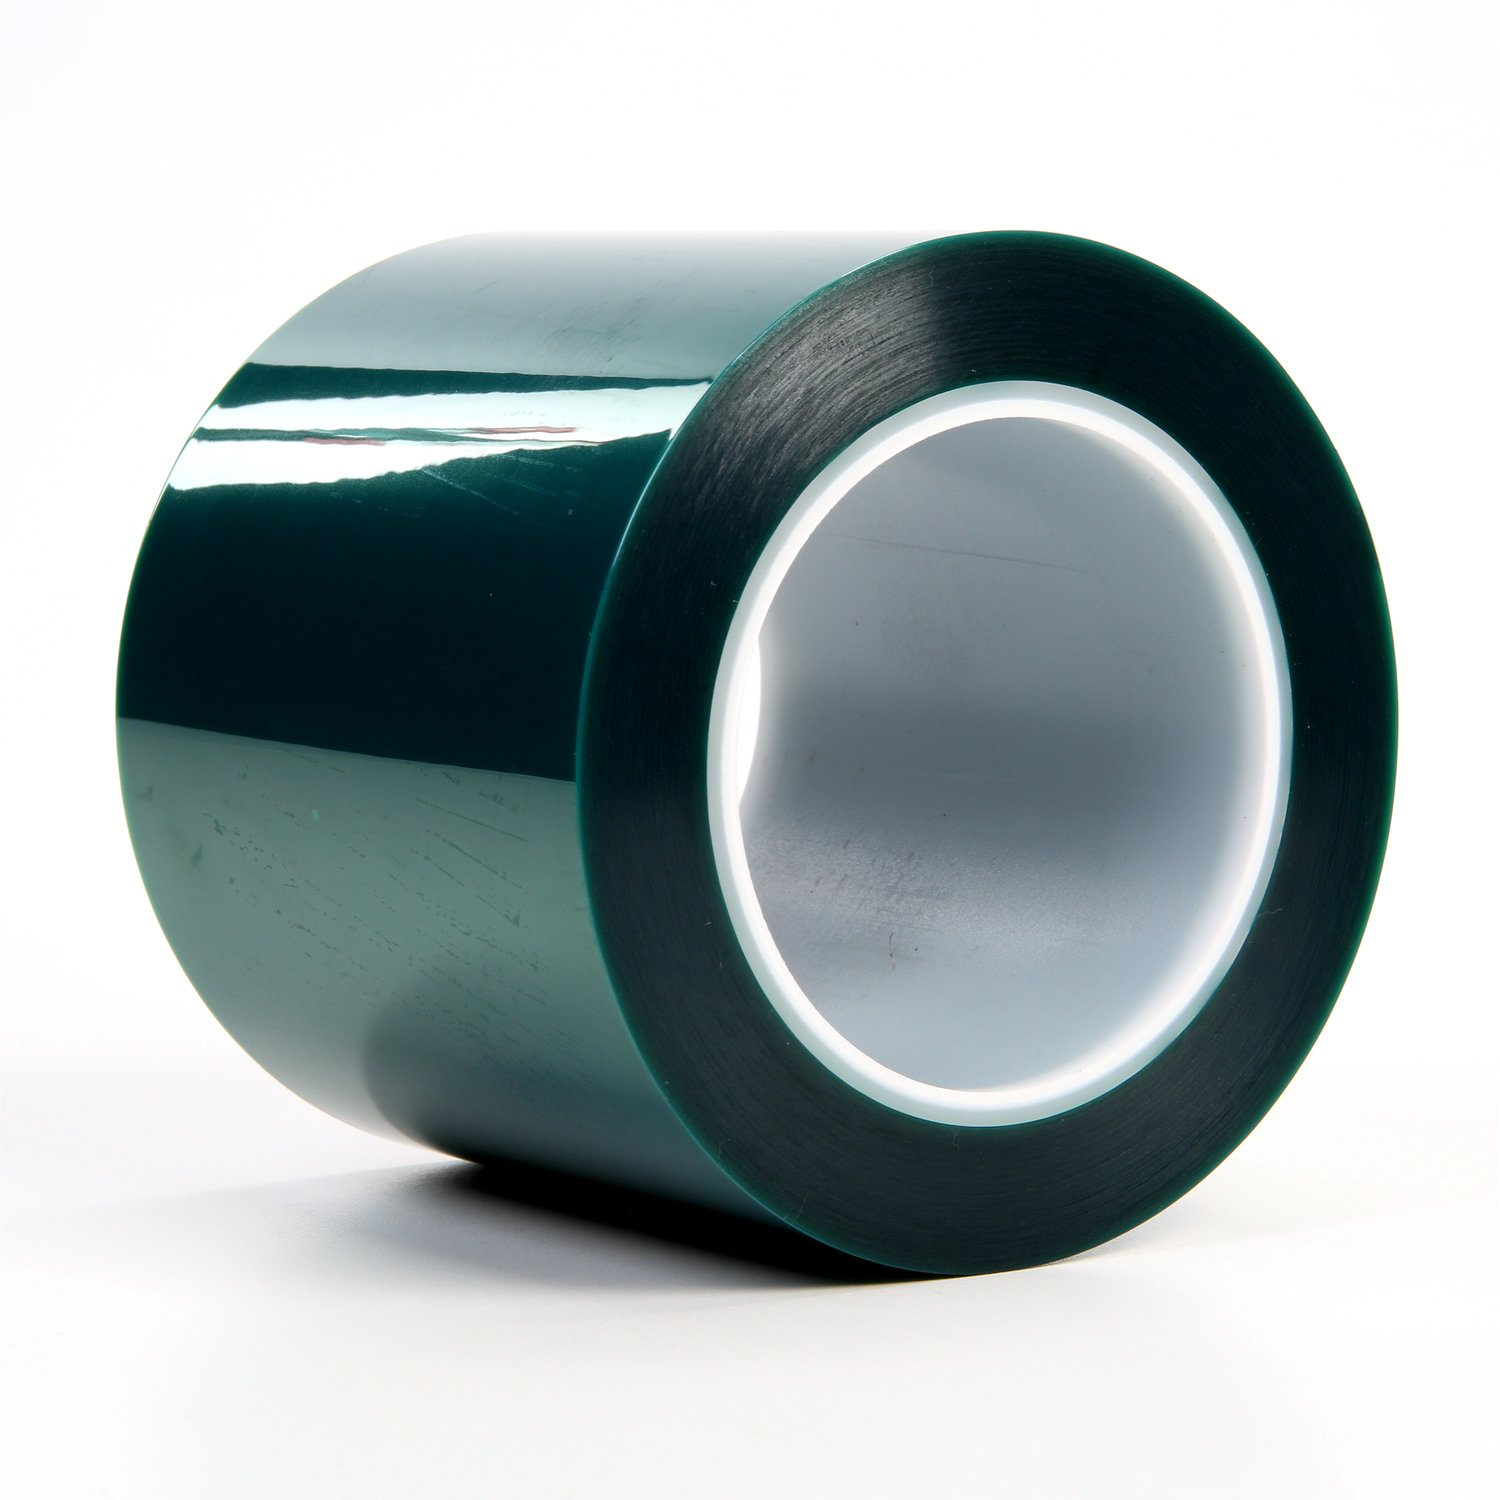 7010374930 - 3M Polyester Tape 8992, Green, 4 in x 72 yd, 3.2 mil, 8 rolls per case